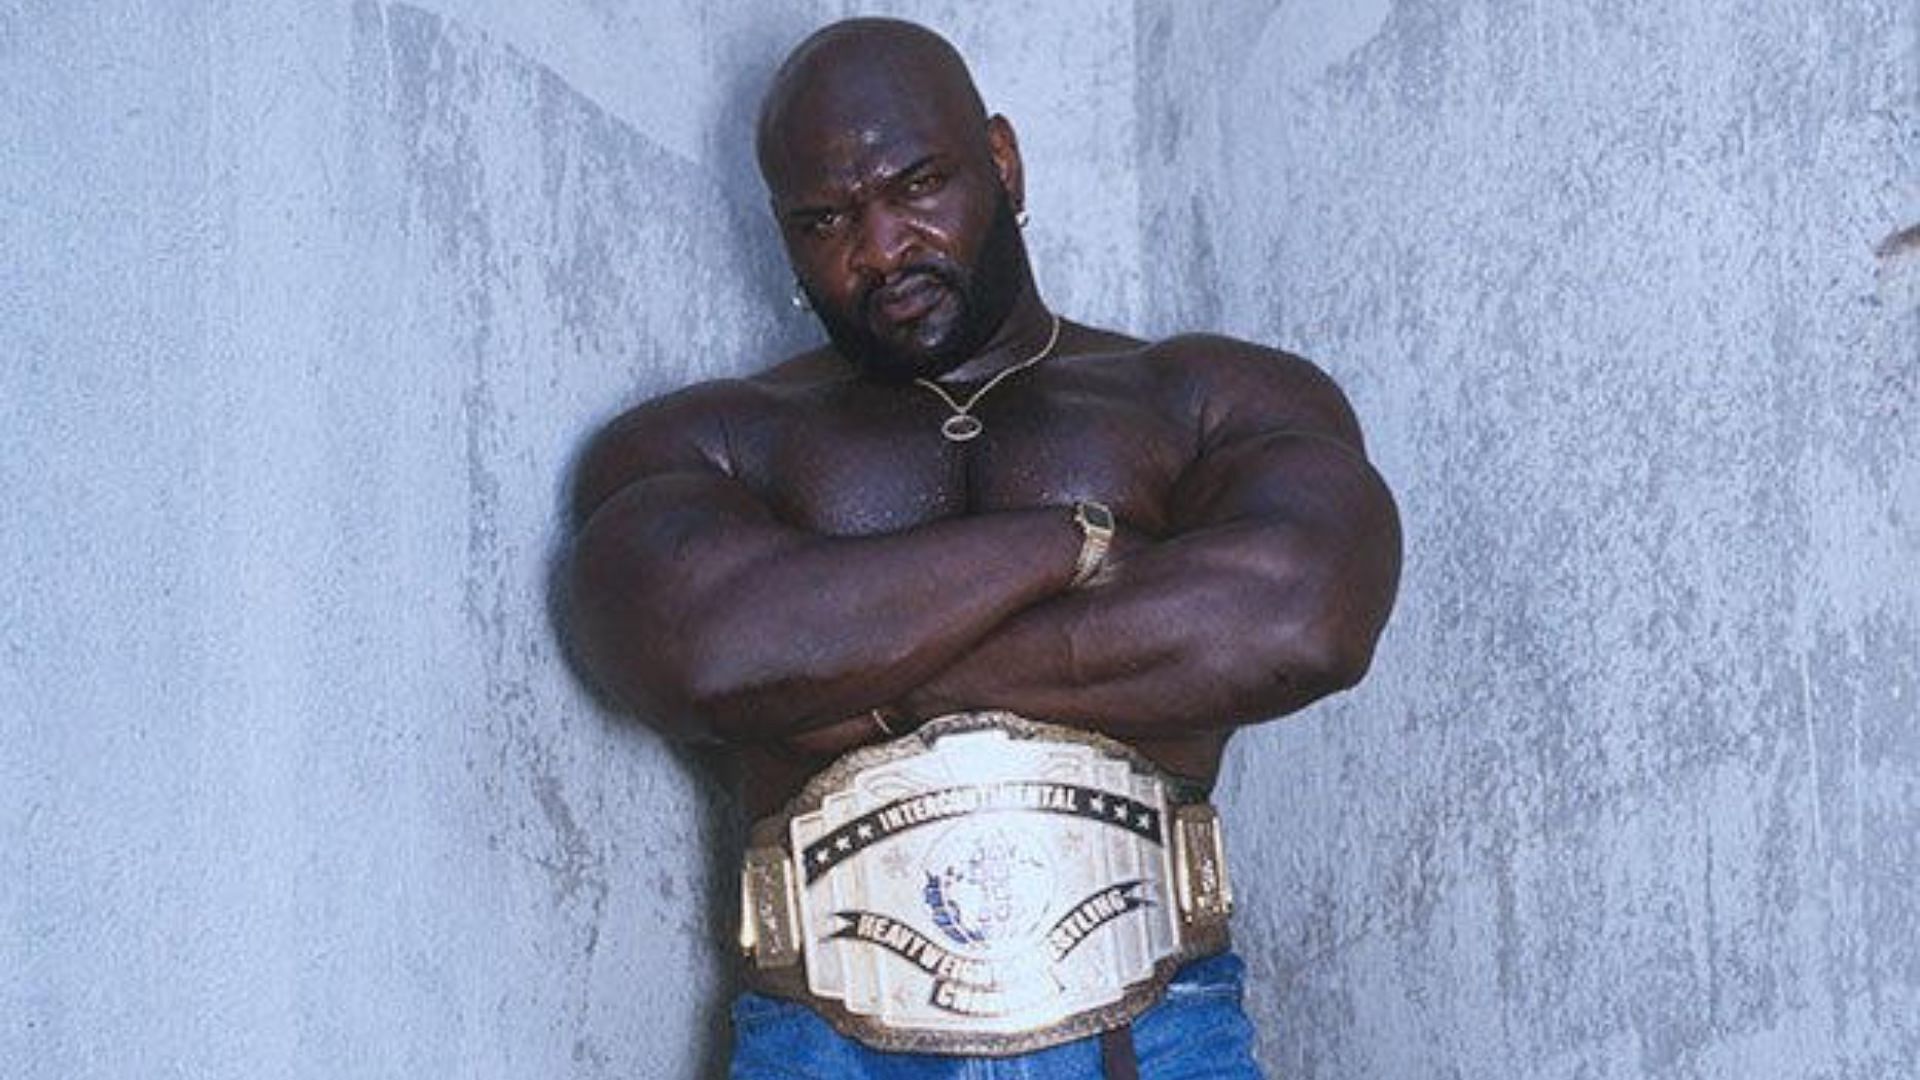 Ahmed Johnson held the Intercontinental Championship in 1996